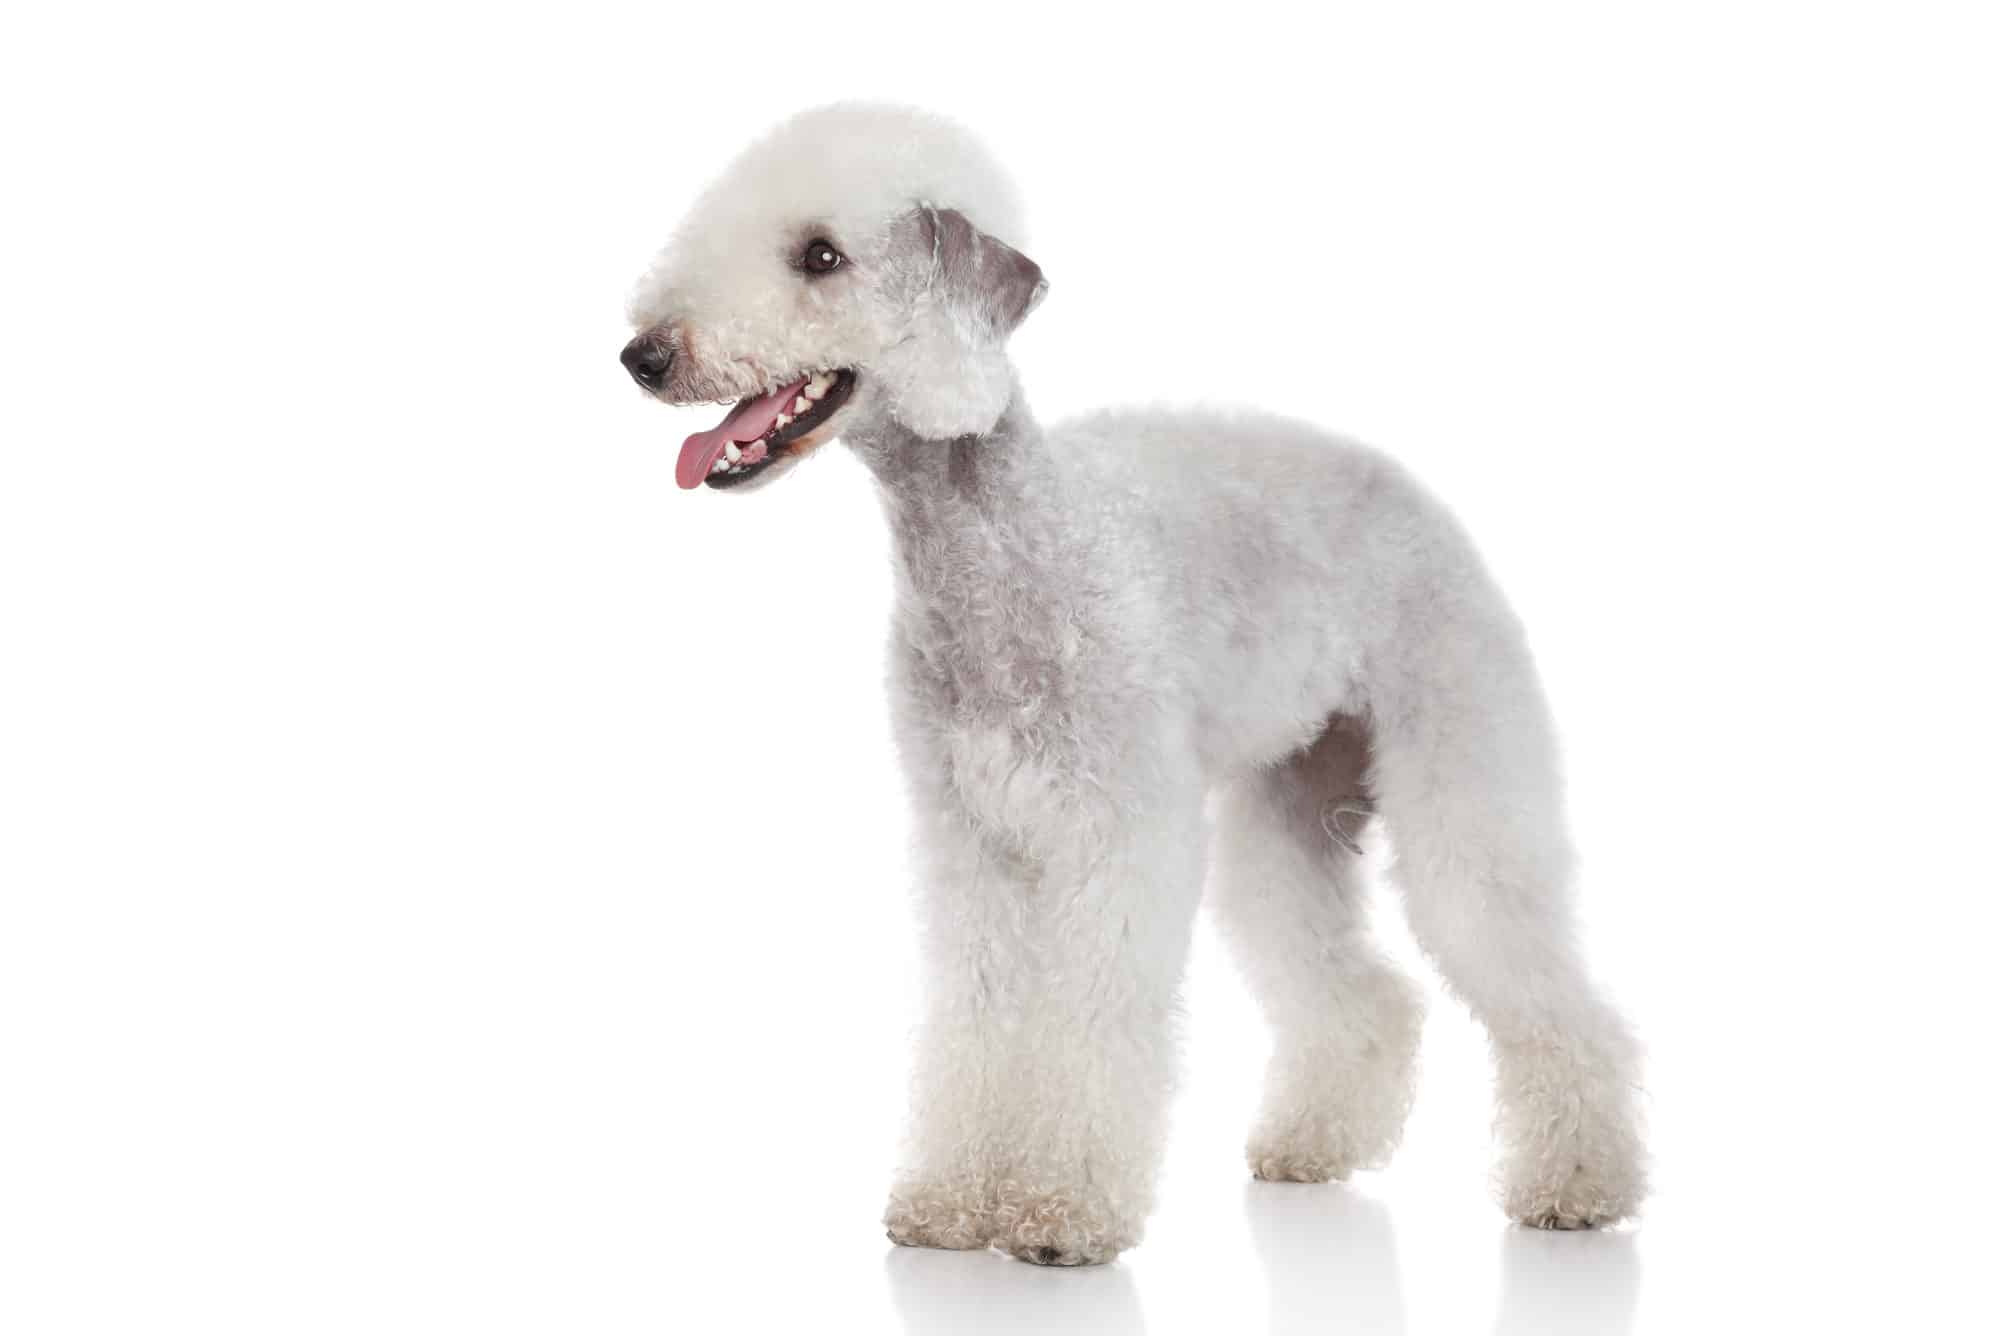 Bedlington terrier stand on a white background